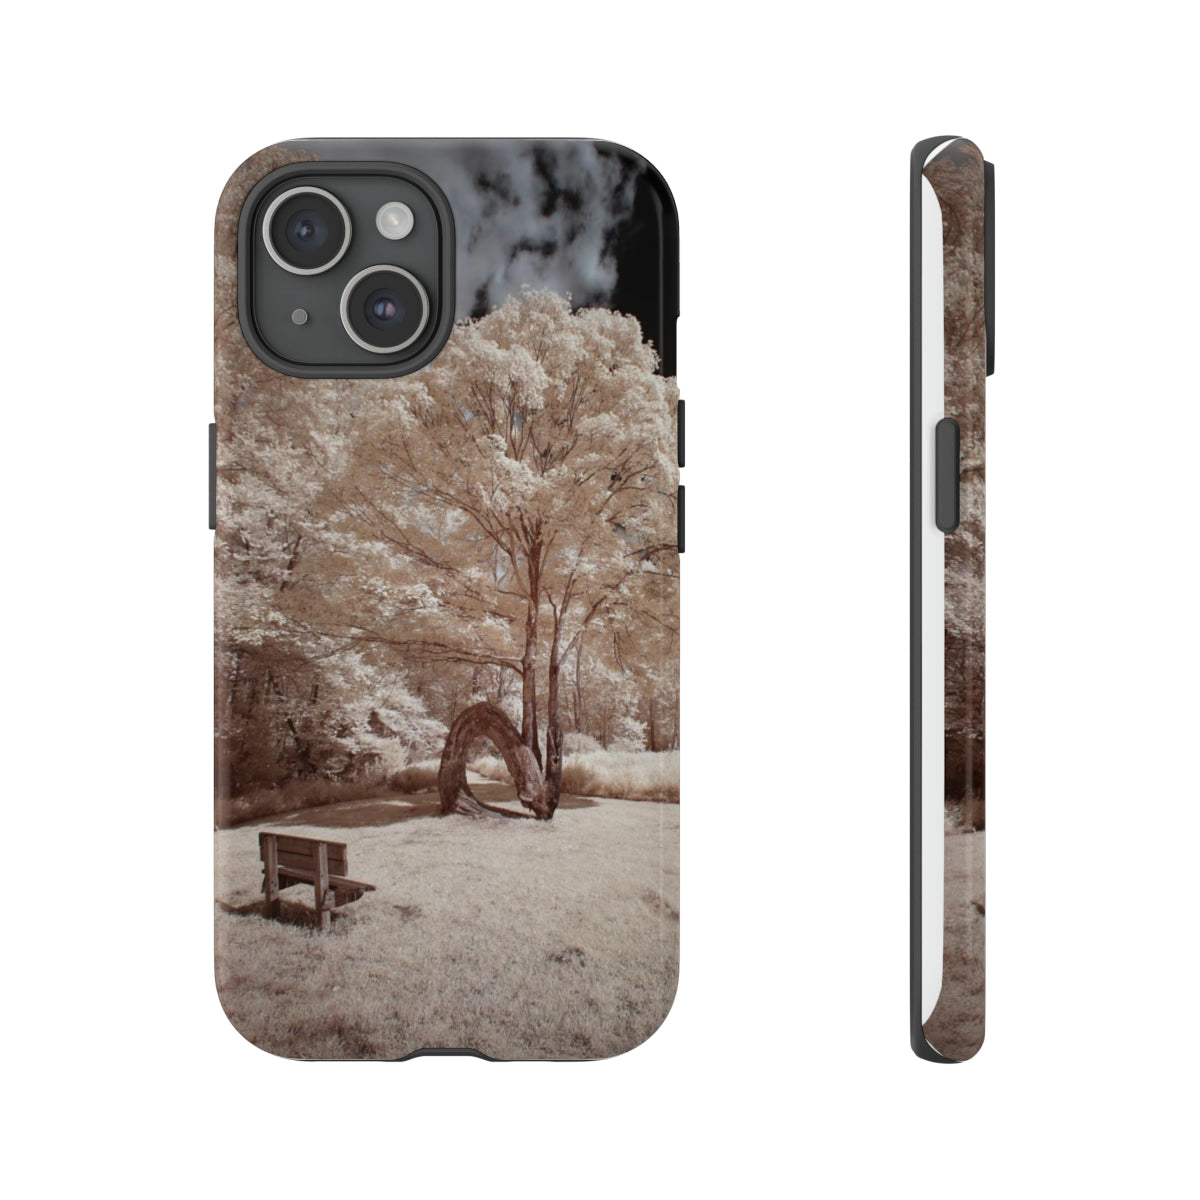 Mobile Phone Cases